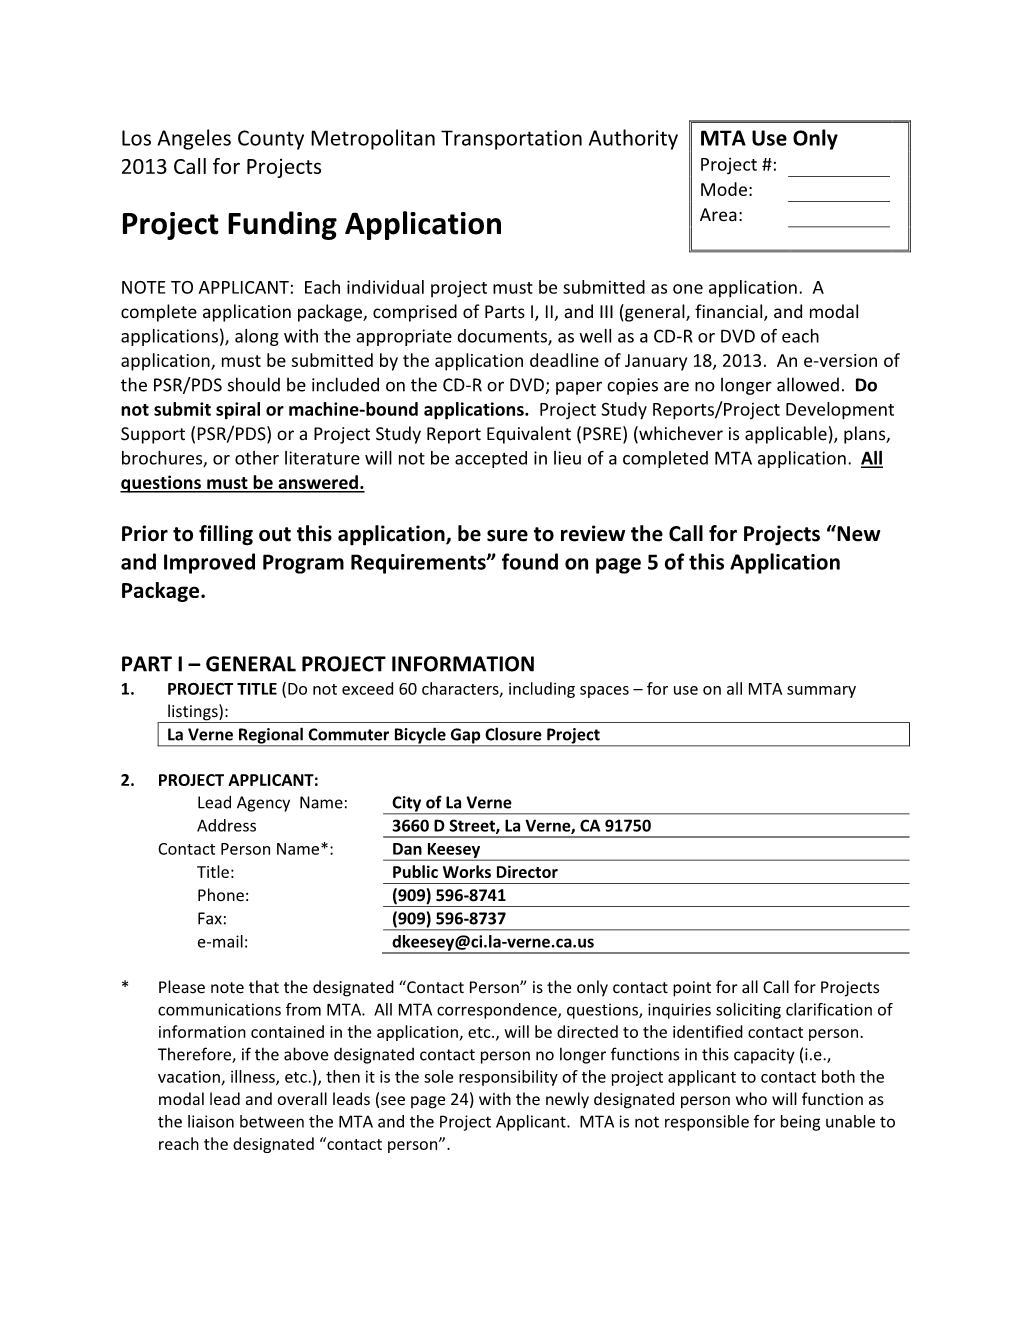 Project Funding Application